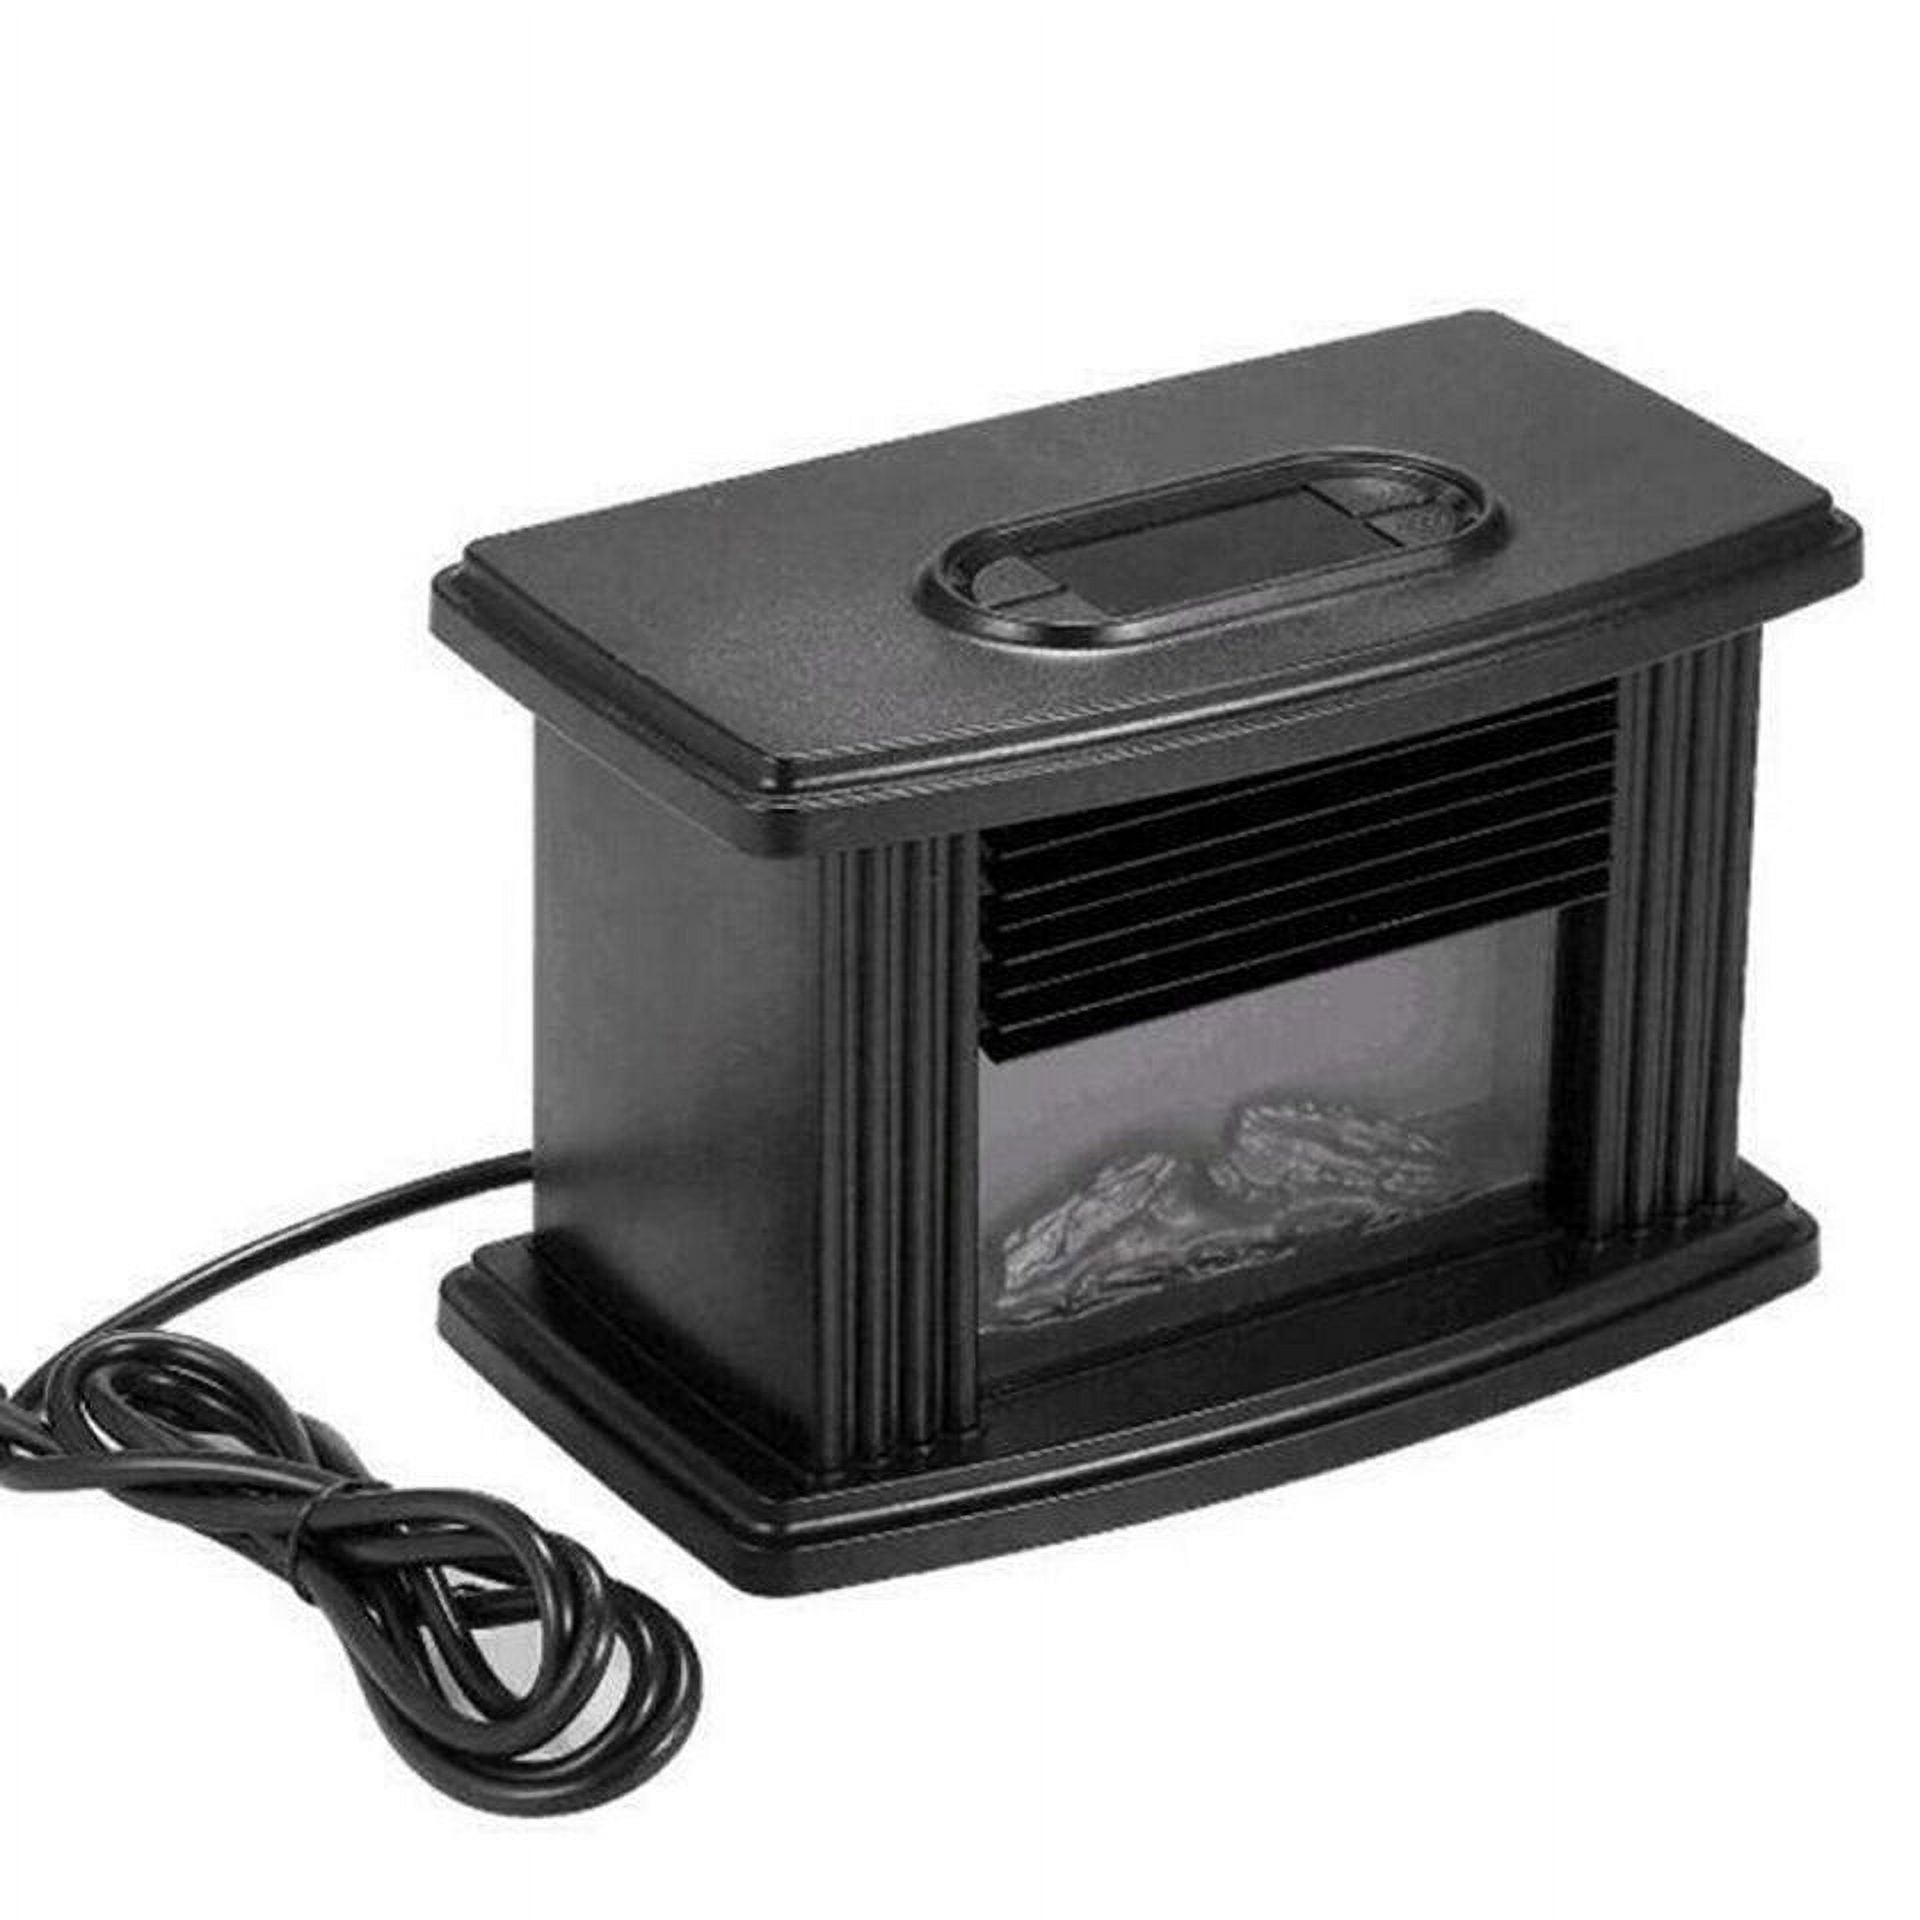 Mini Stove Electric Portable LED Flame 600 Watts - HM-8835 Fireplace Home  Camper